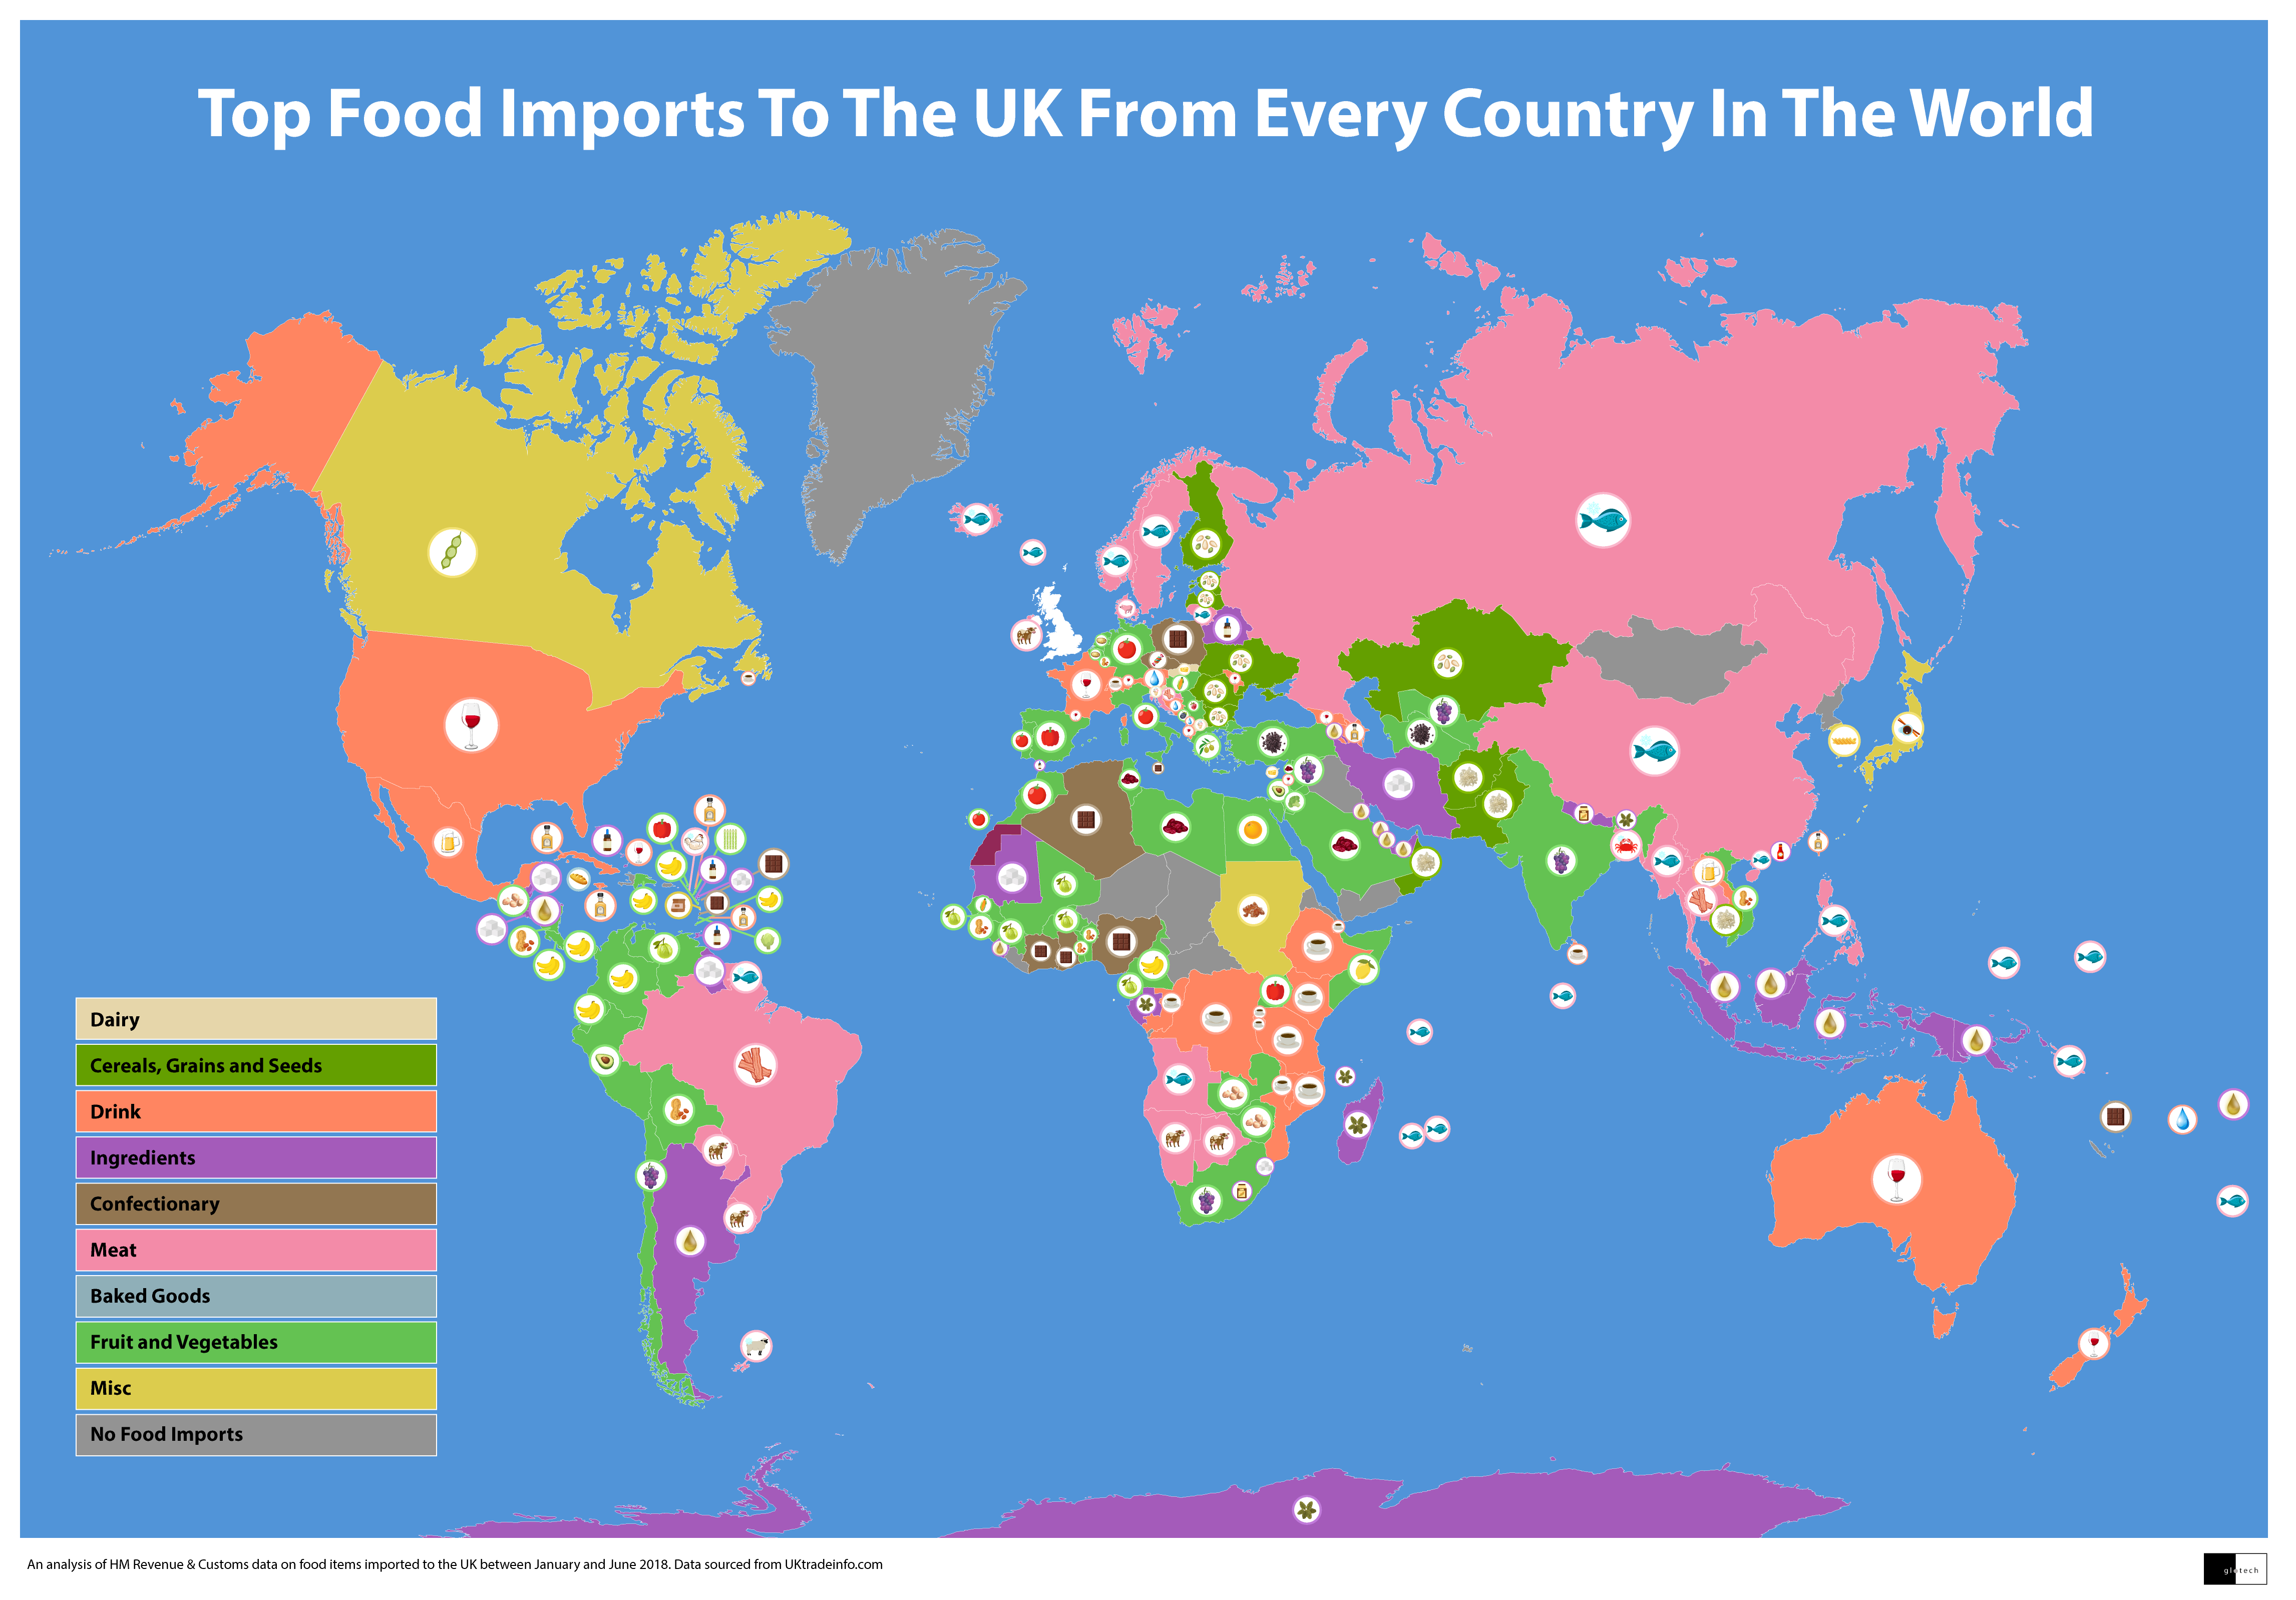 The UK's Top Food and Drink Imports 